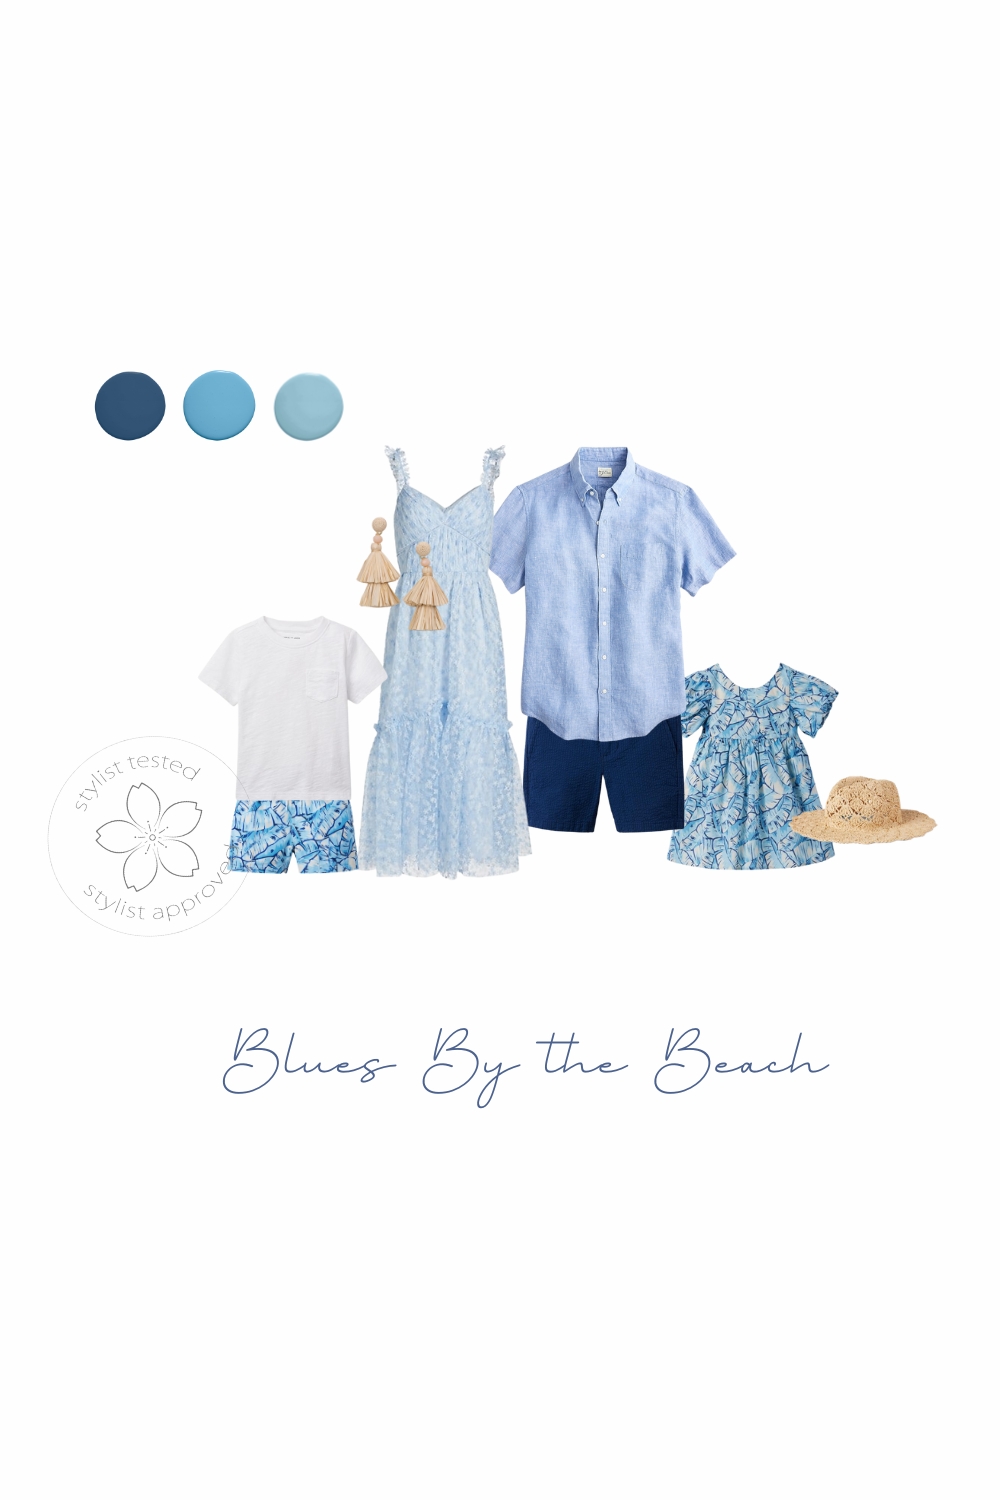 Maui family beach photos outfit styling